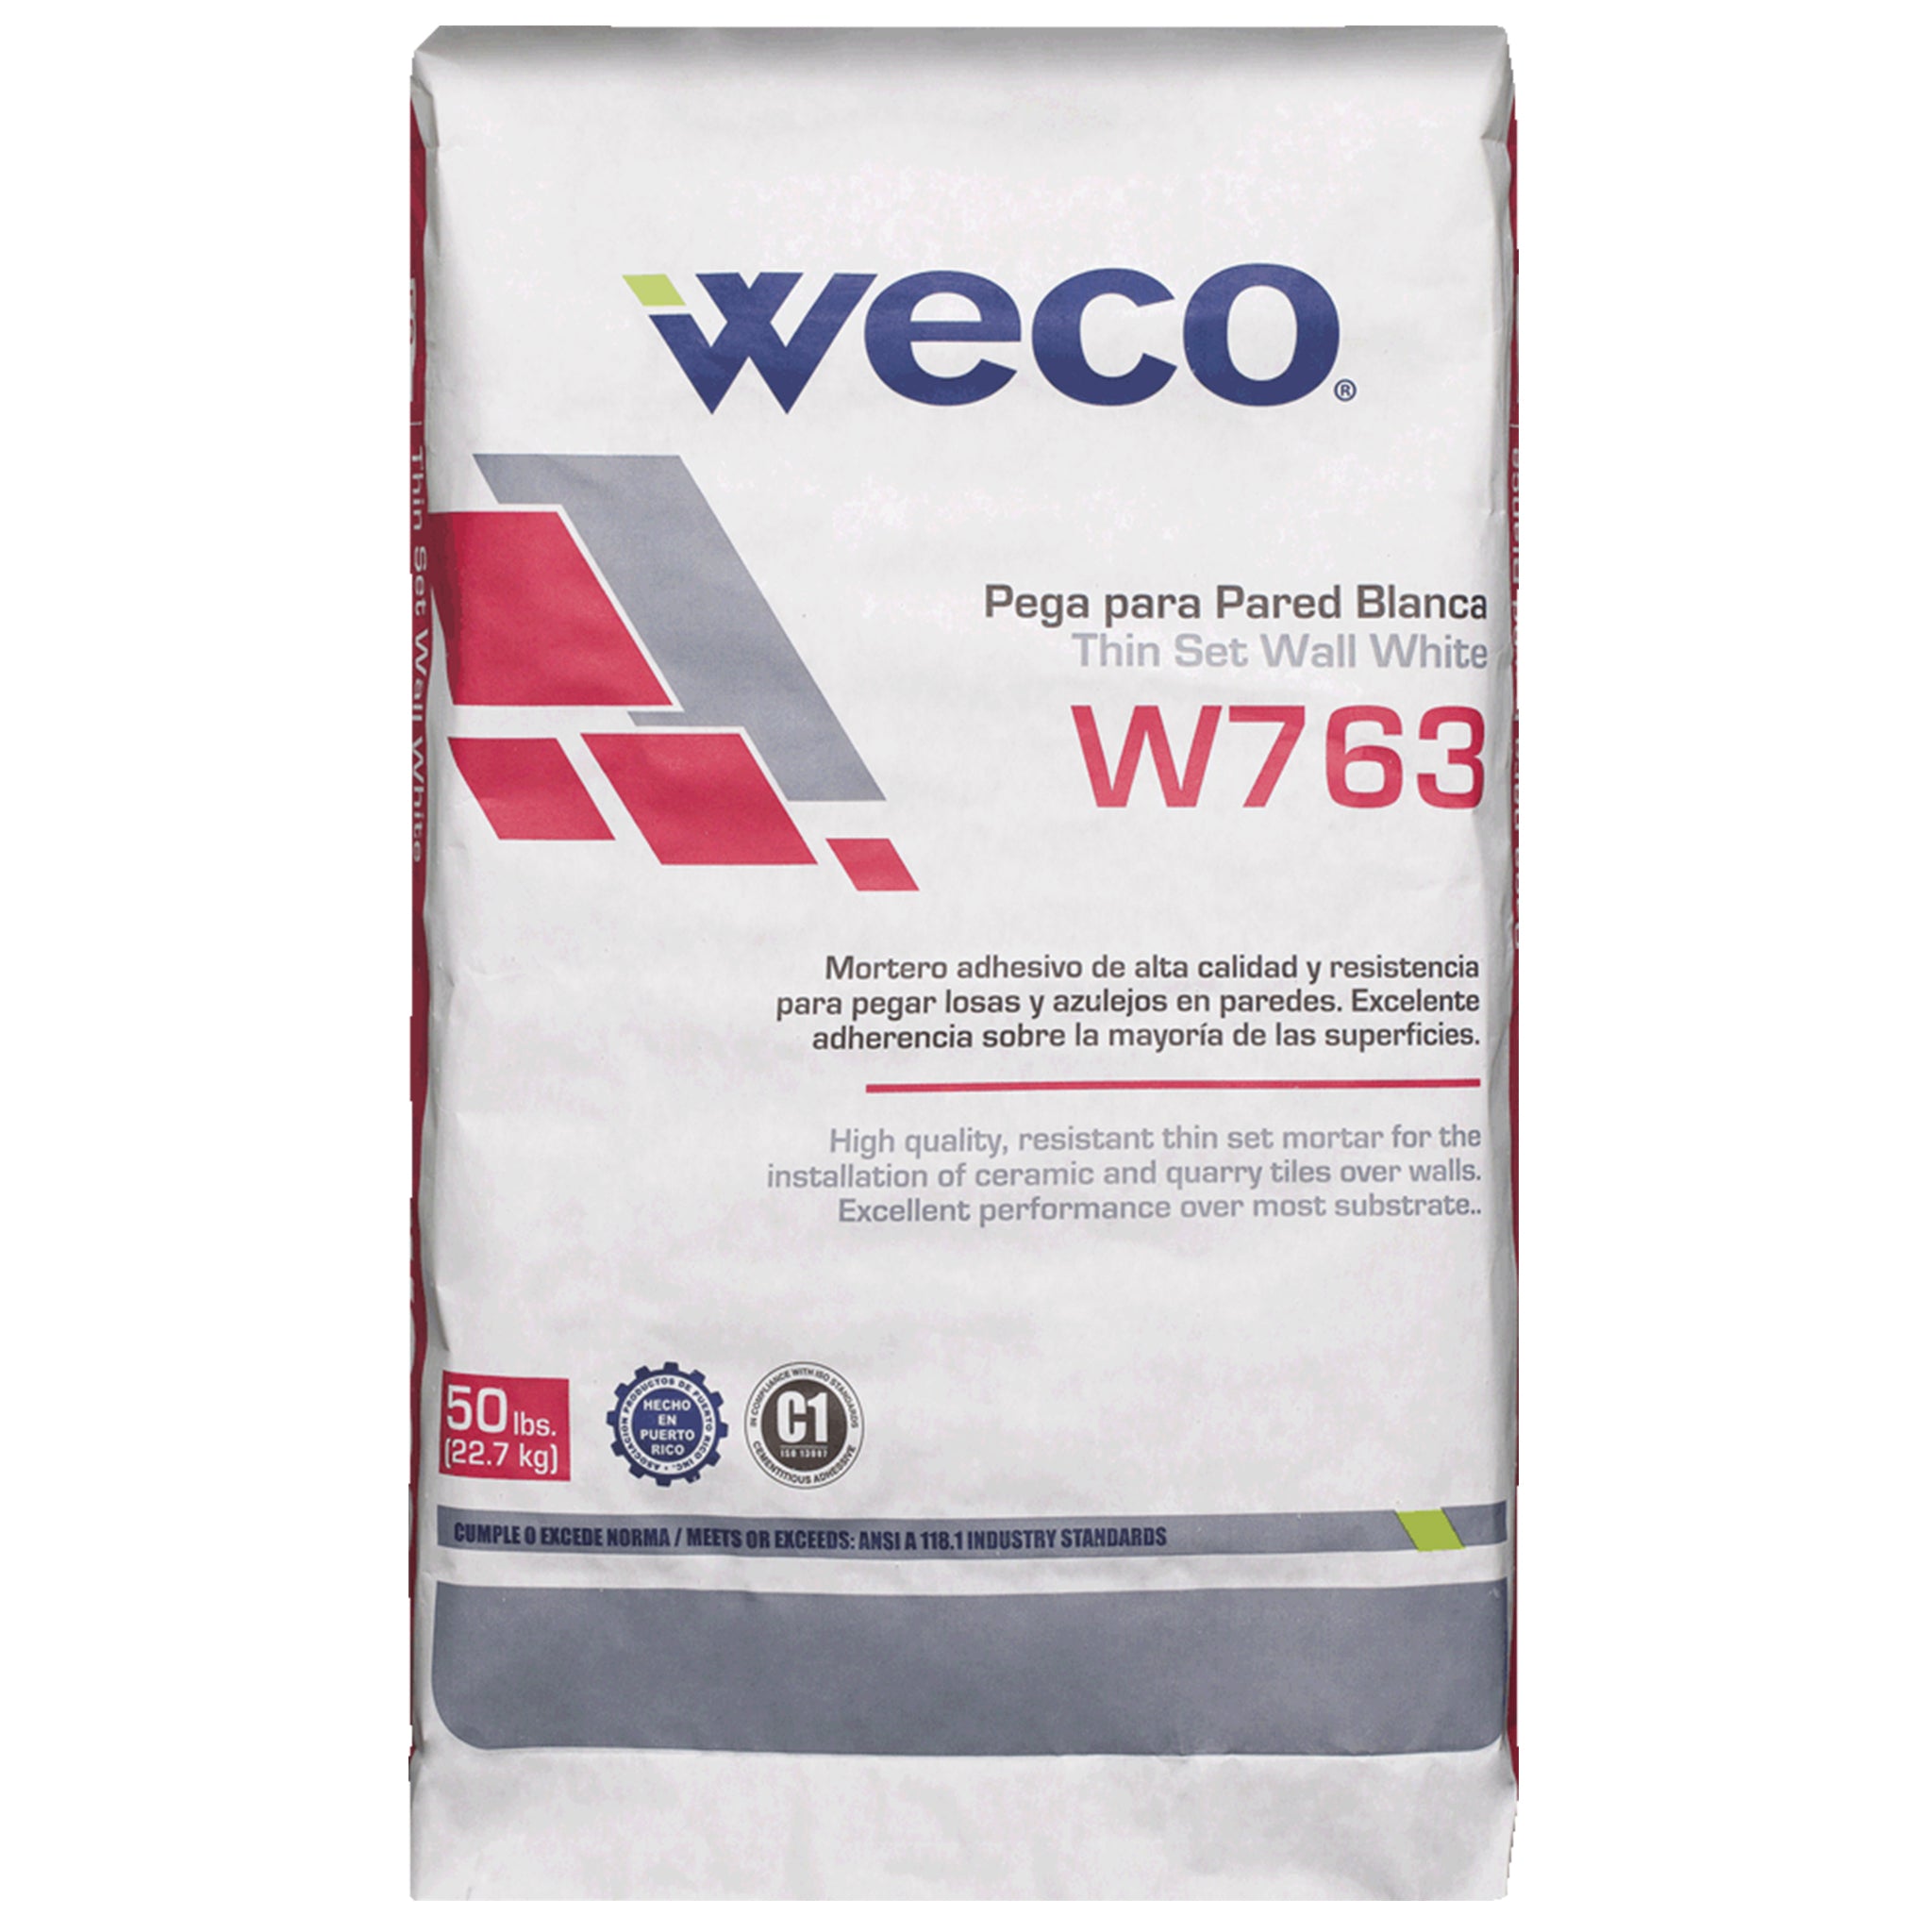 W-763 Wall Thinset White